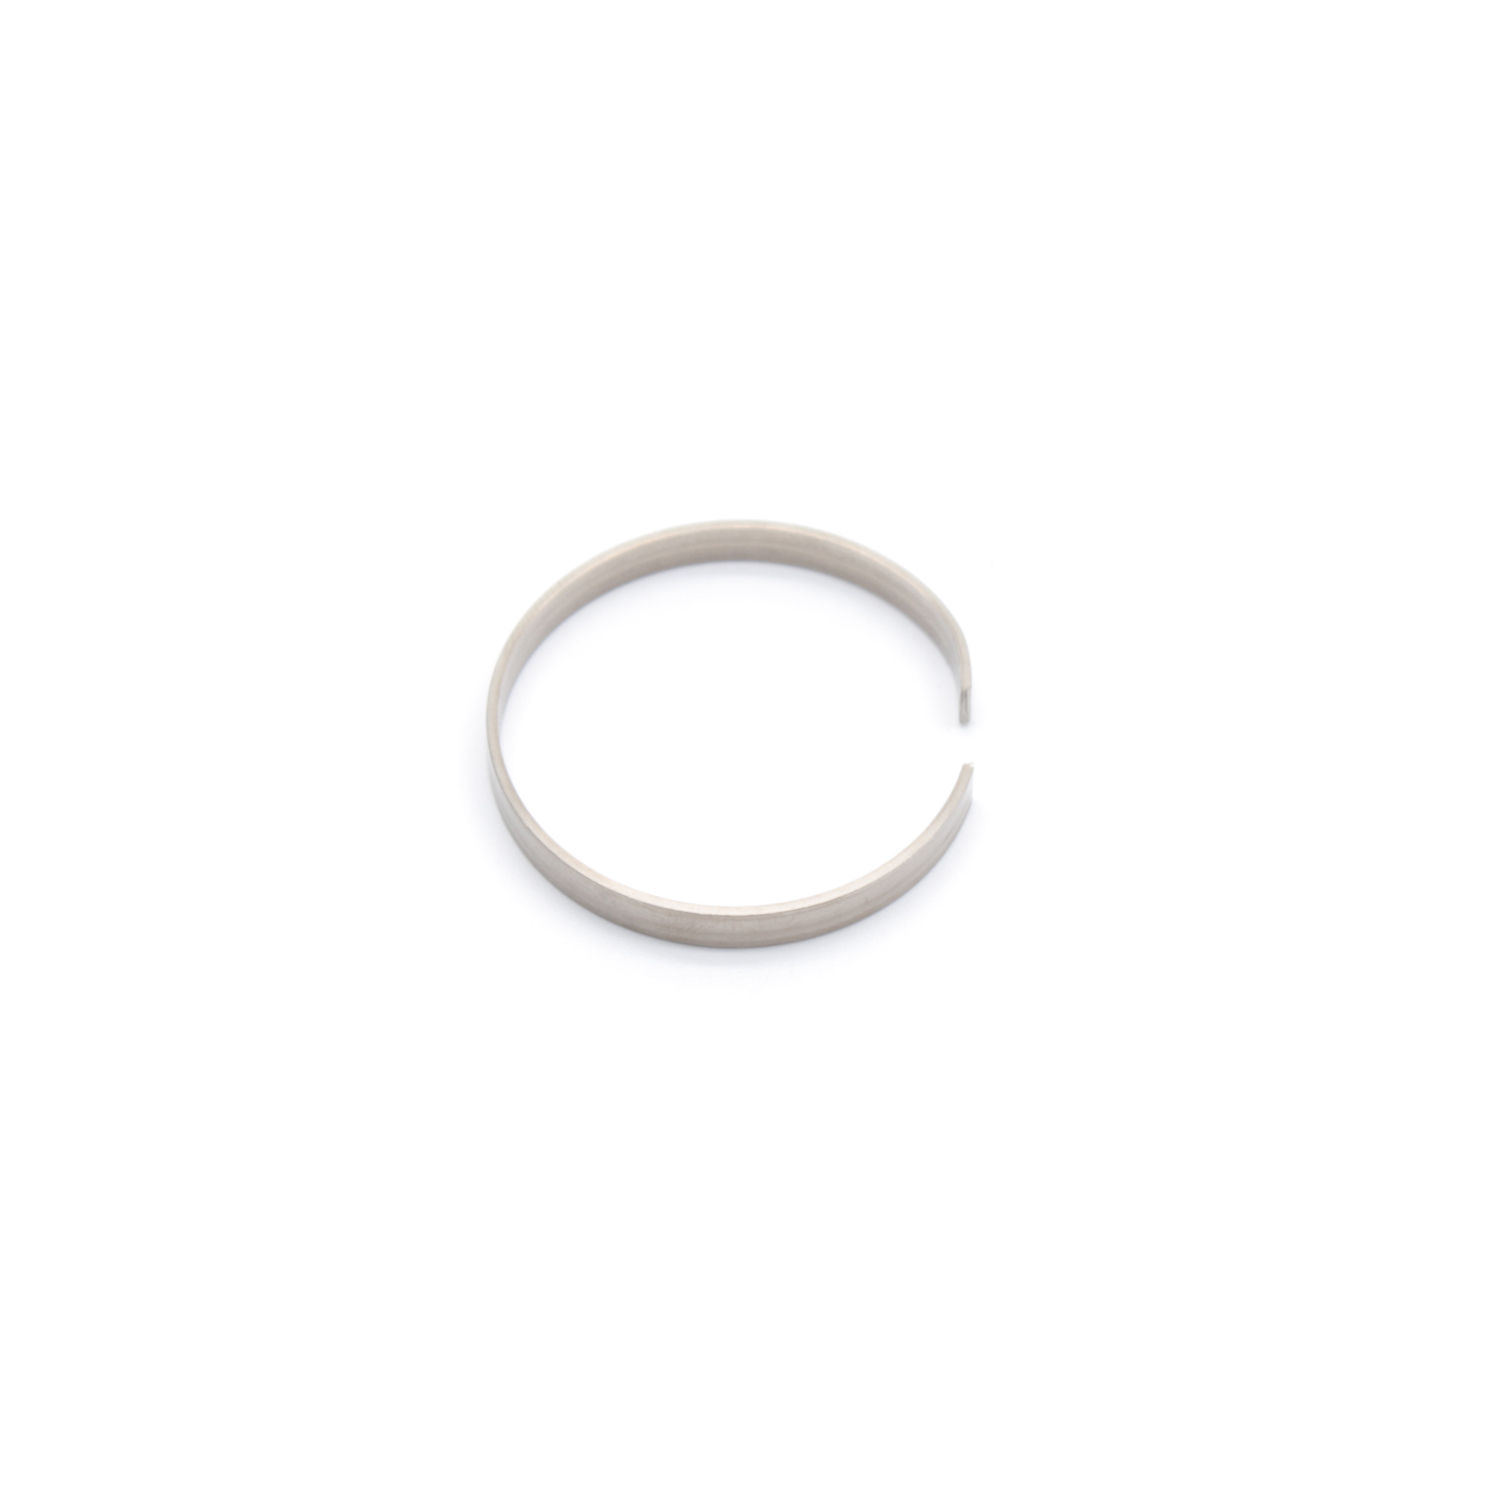 Oswald Eastern planer FOX Internal Smalley Retaining Ring HHM-34-S02 Hoopster 302 SS | Silverfish  UK